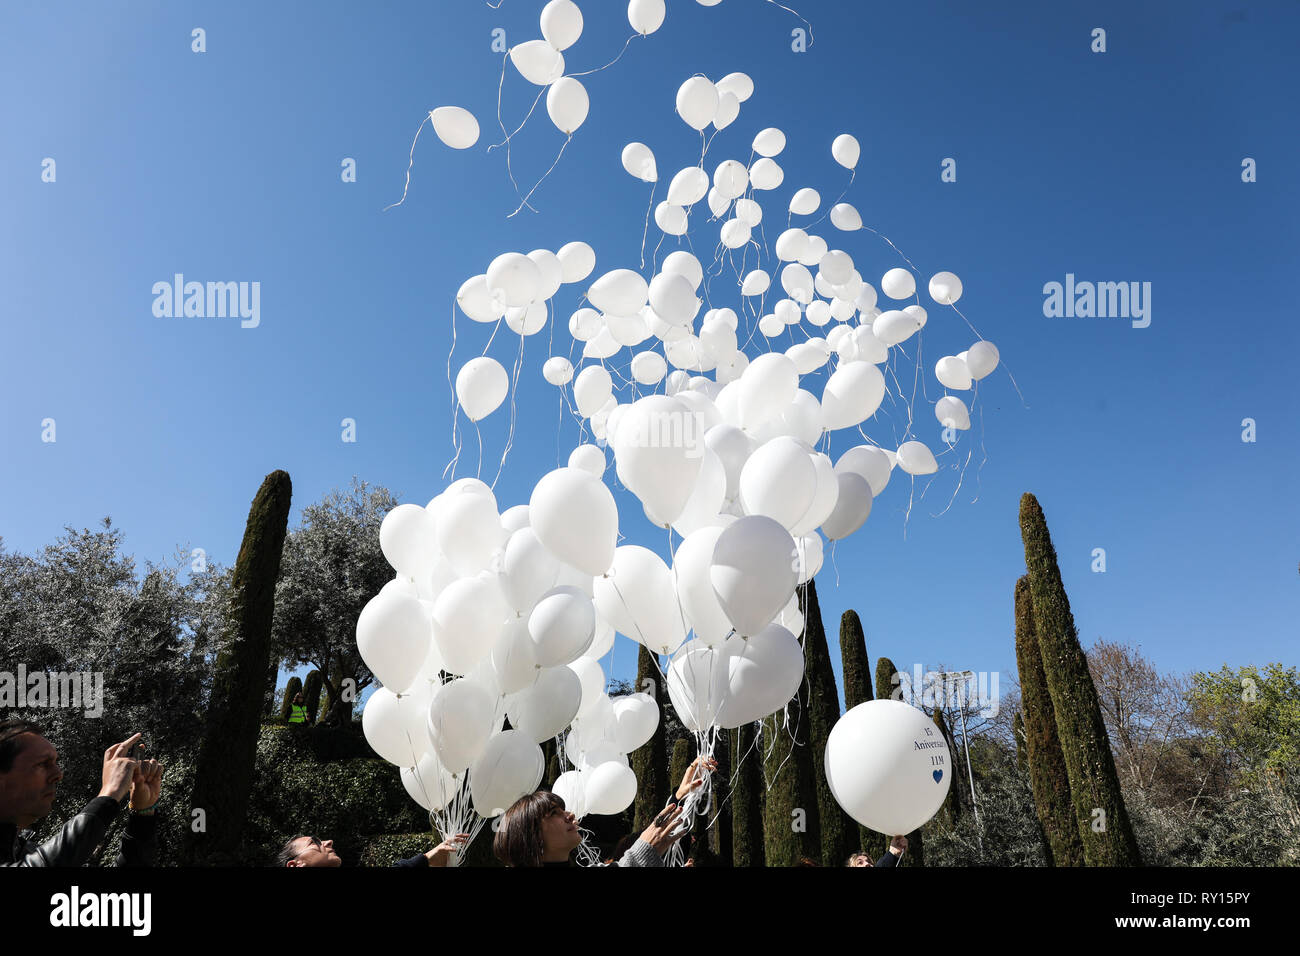 Madrid, Spain. 11th Mar 2019. The Association of Victims of Terrorism (AVT) has launched on Monday 192 white balloons in an act in the Forest of Memory of El Retiro Park in memory of the victims of the attacks of March 11, 2004, in the year in which they have been fifteen since the tragedy. Credit: Jesús Hellin/Alamy Live News Stock Photo